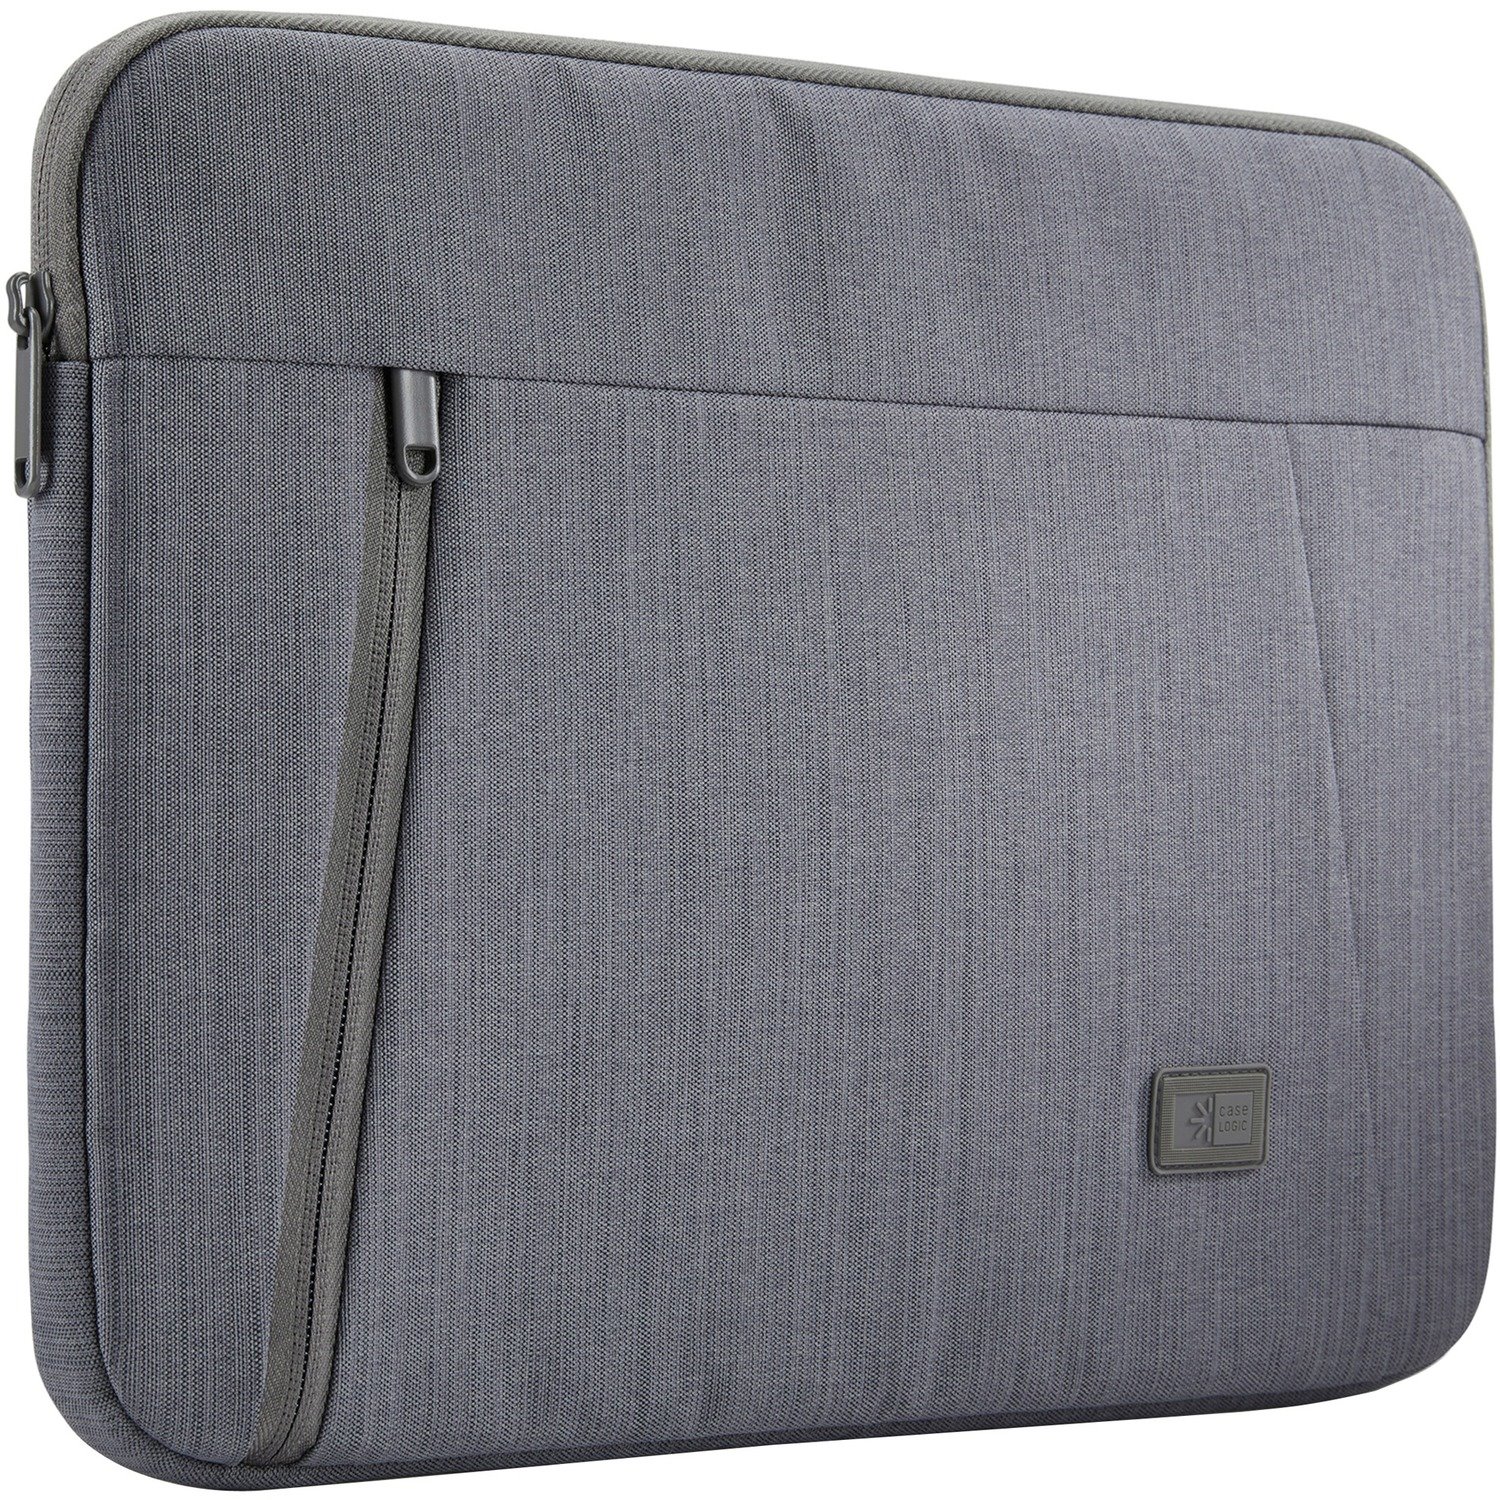 Case Logic Huxton Carrying Case (Sleeve) for 14" Notebook - Graphite